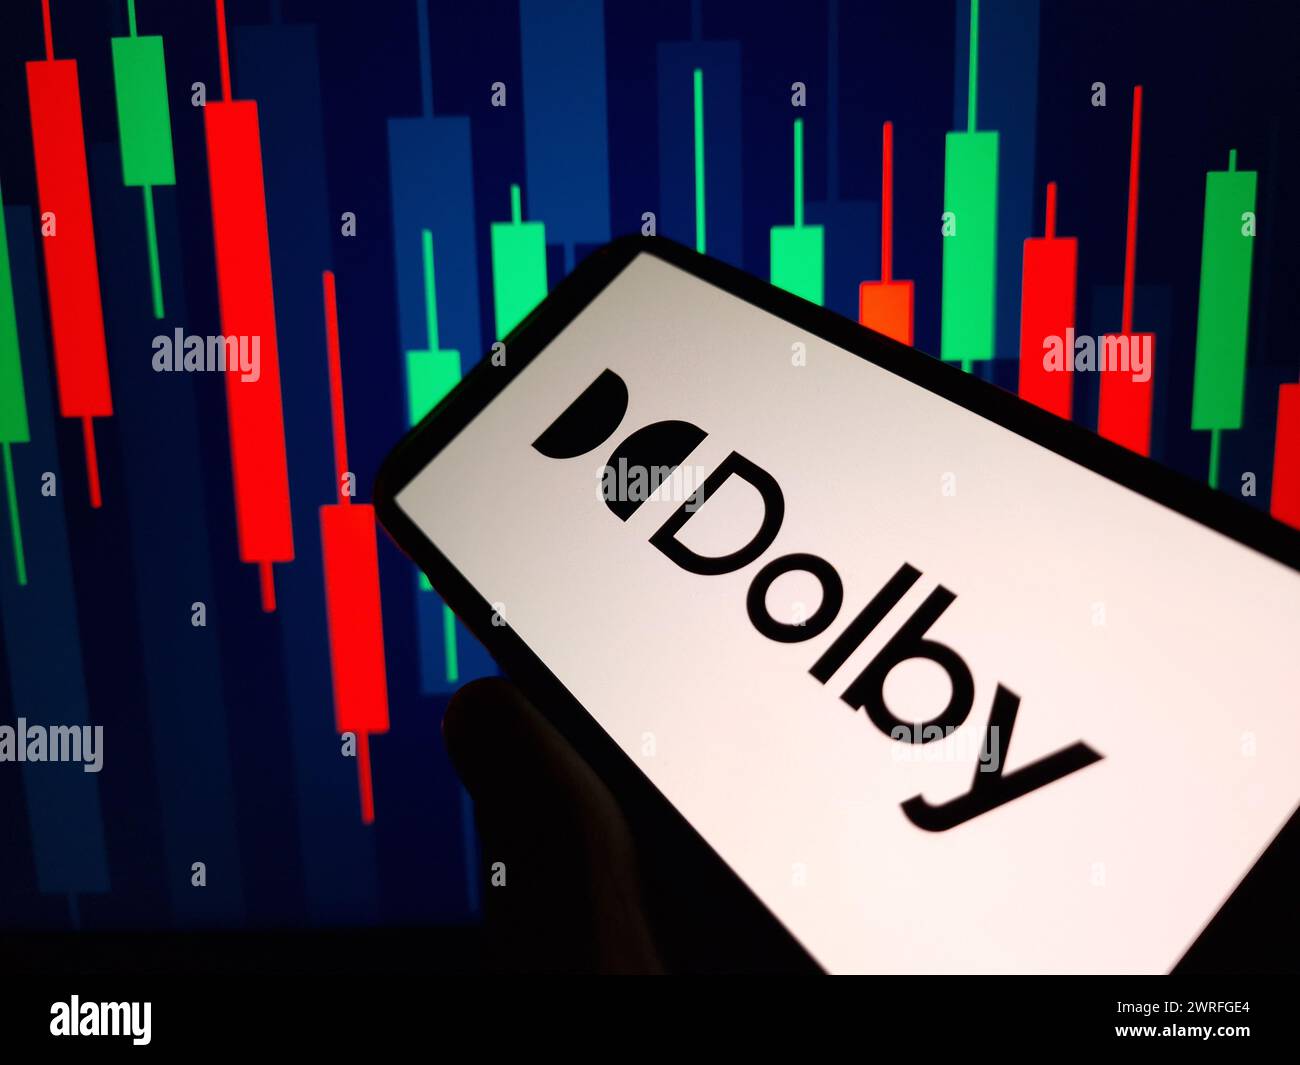 Konskie, Poland - March 11, 2024: Dolby company logo displayed on mobile phone Stock Photo